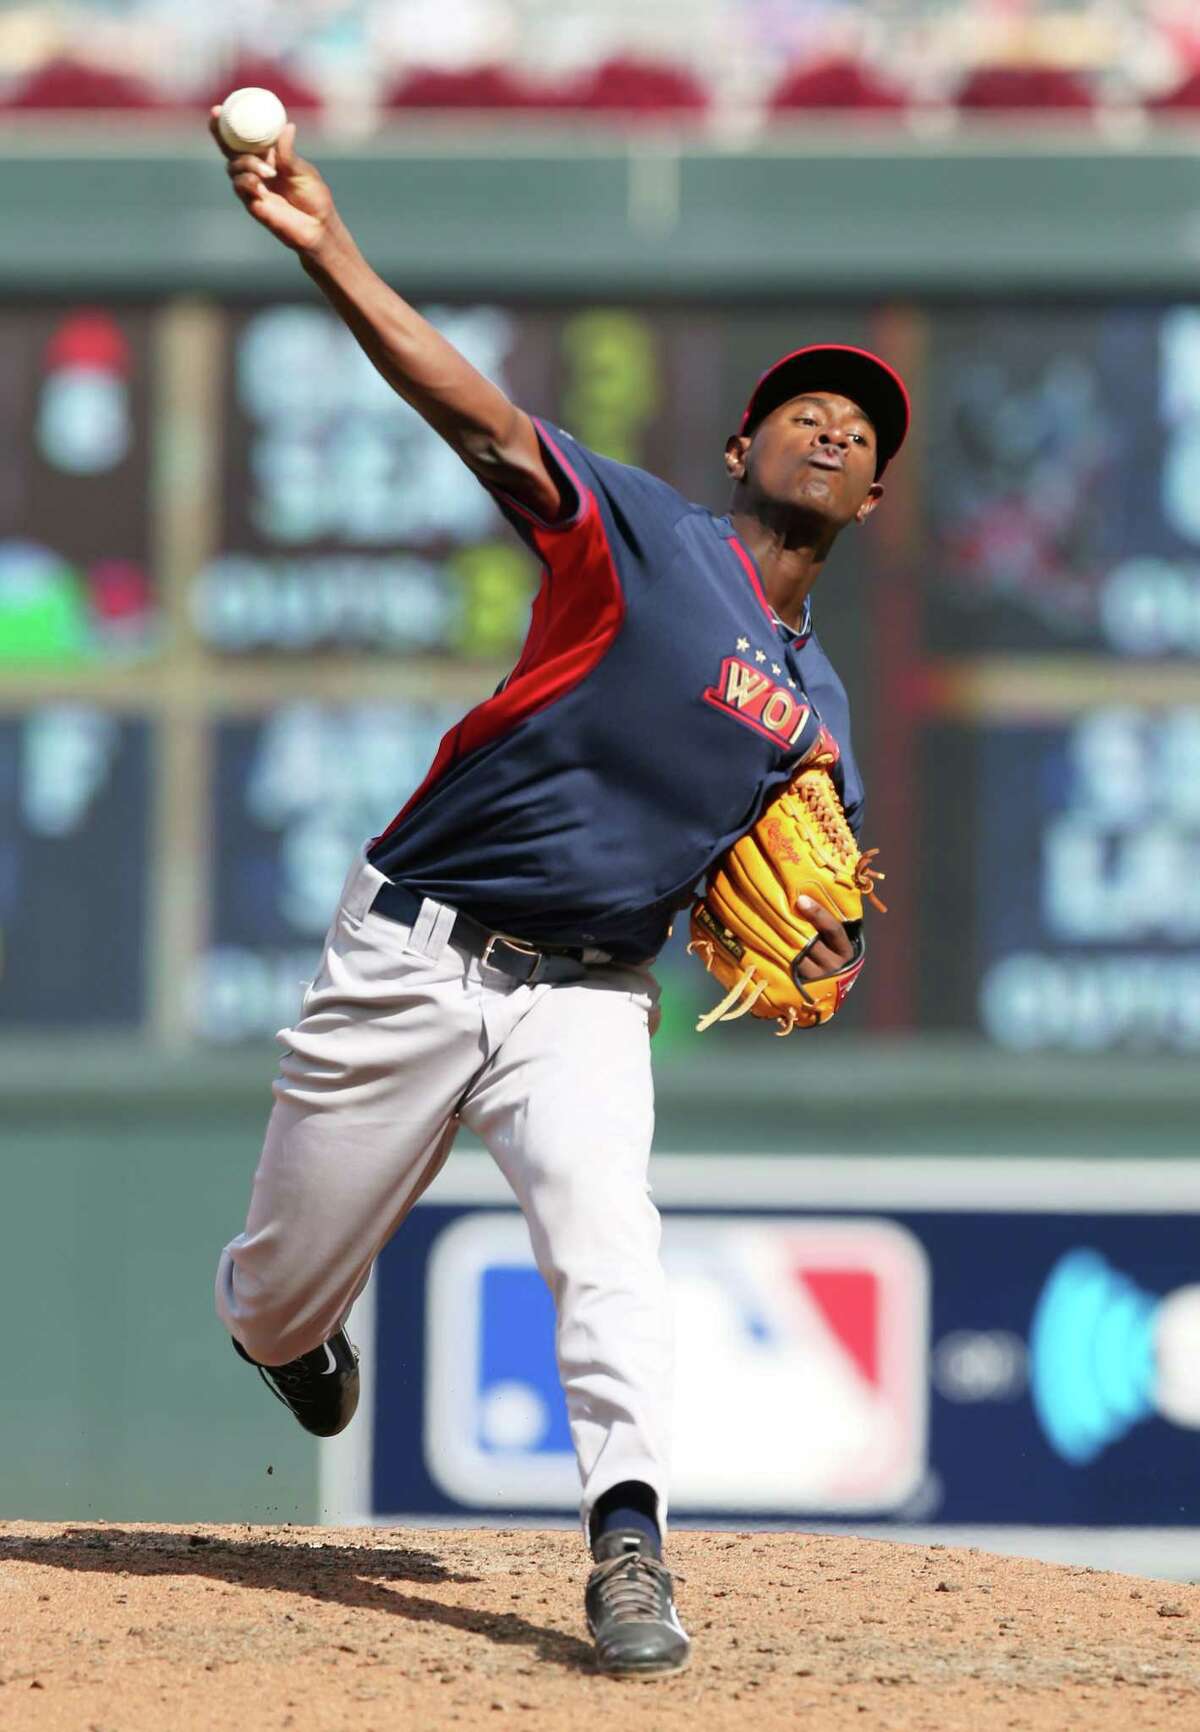 In this July 13, 2014, file photo, World’s pitcher Luis Severino throws a pitch during the All-Star Futures baseball game against Team United States in Minneapolis. Touted pitching prospect Severino will make his next start with the New York Yankees. Manager Joe Girardi says the 21-year-old Severino will start at home next week against Boston, but did not specify when he would get the ball.